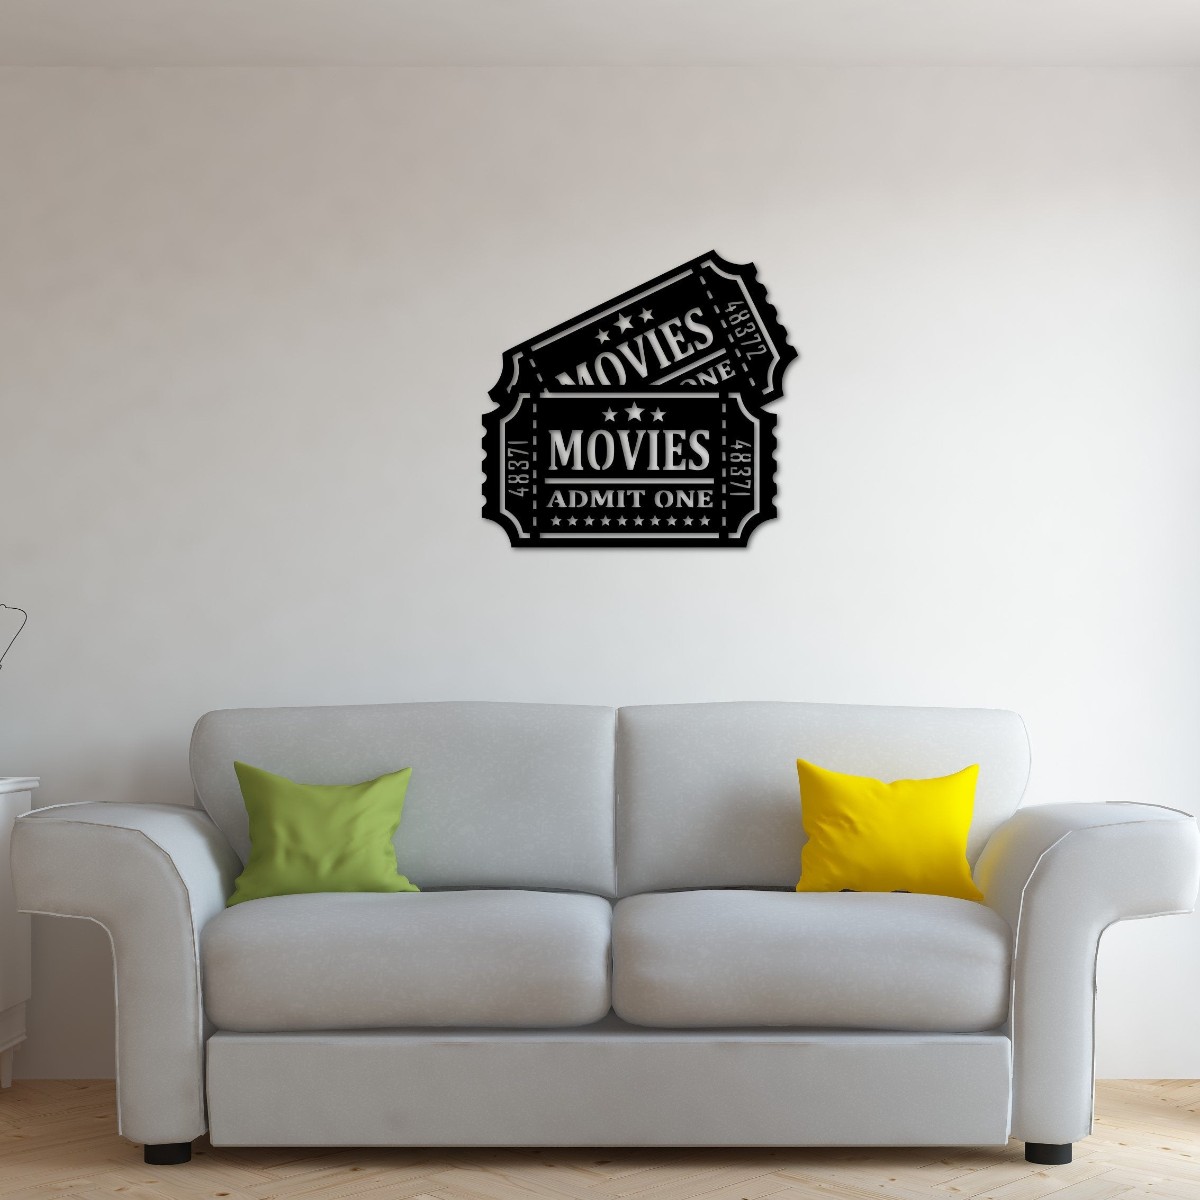 Metal Movie Tickets Sign, Movie Theater Decor, Admit One Sign, Home Theater Gifts, Metal Wall Art, Movie Night Theater Room Props